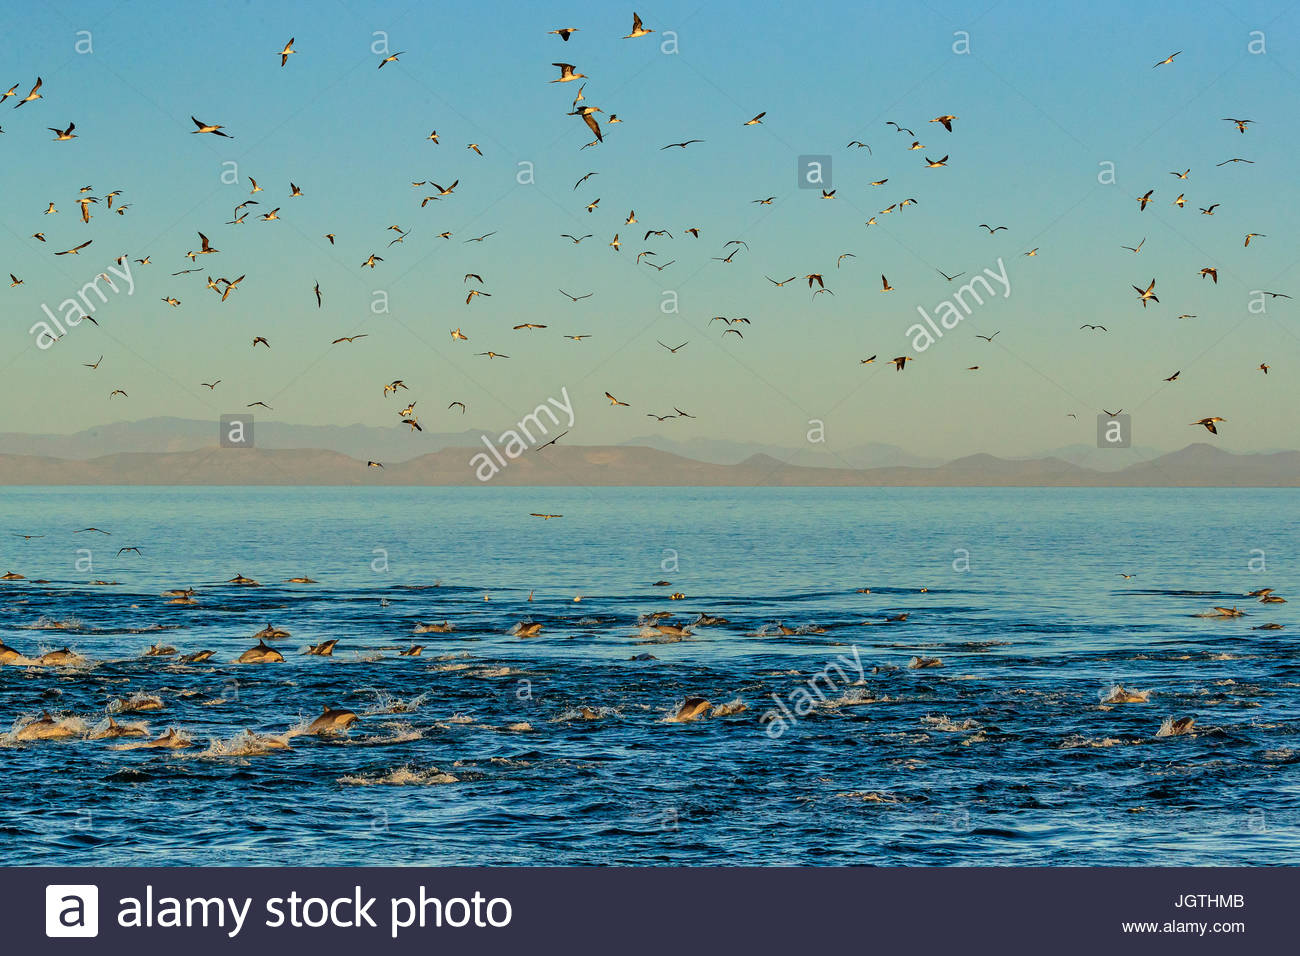 Long-beaked common dolphins, Delphinus capensis, and sea birds in a feeding frenzy. Stock Photo